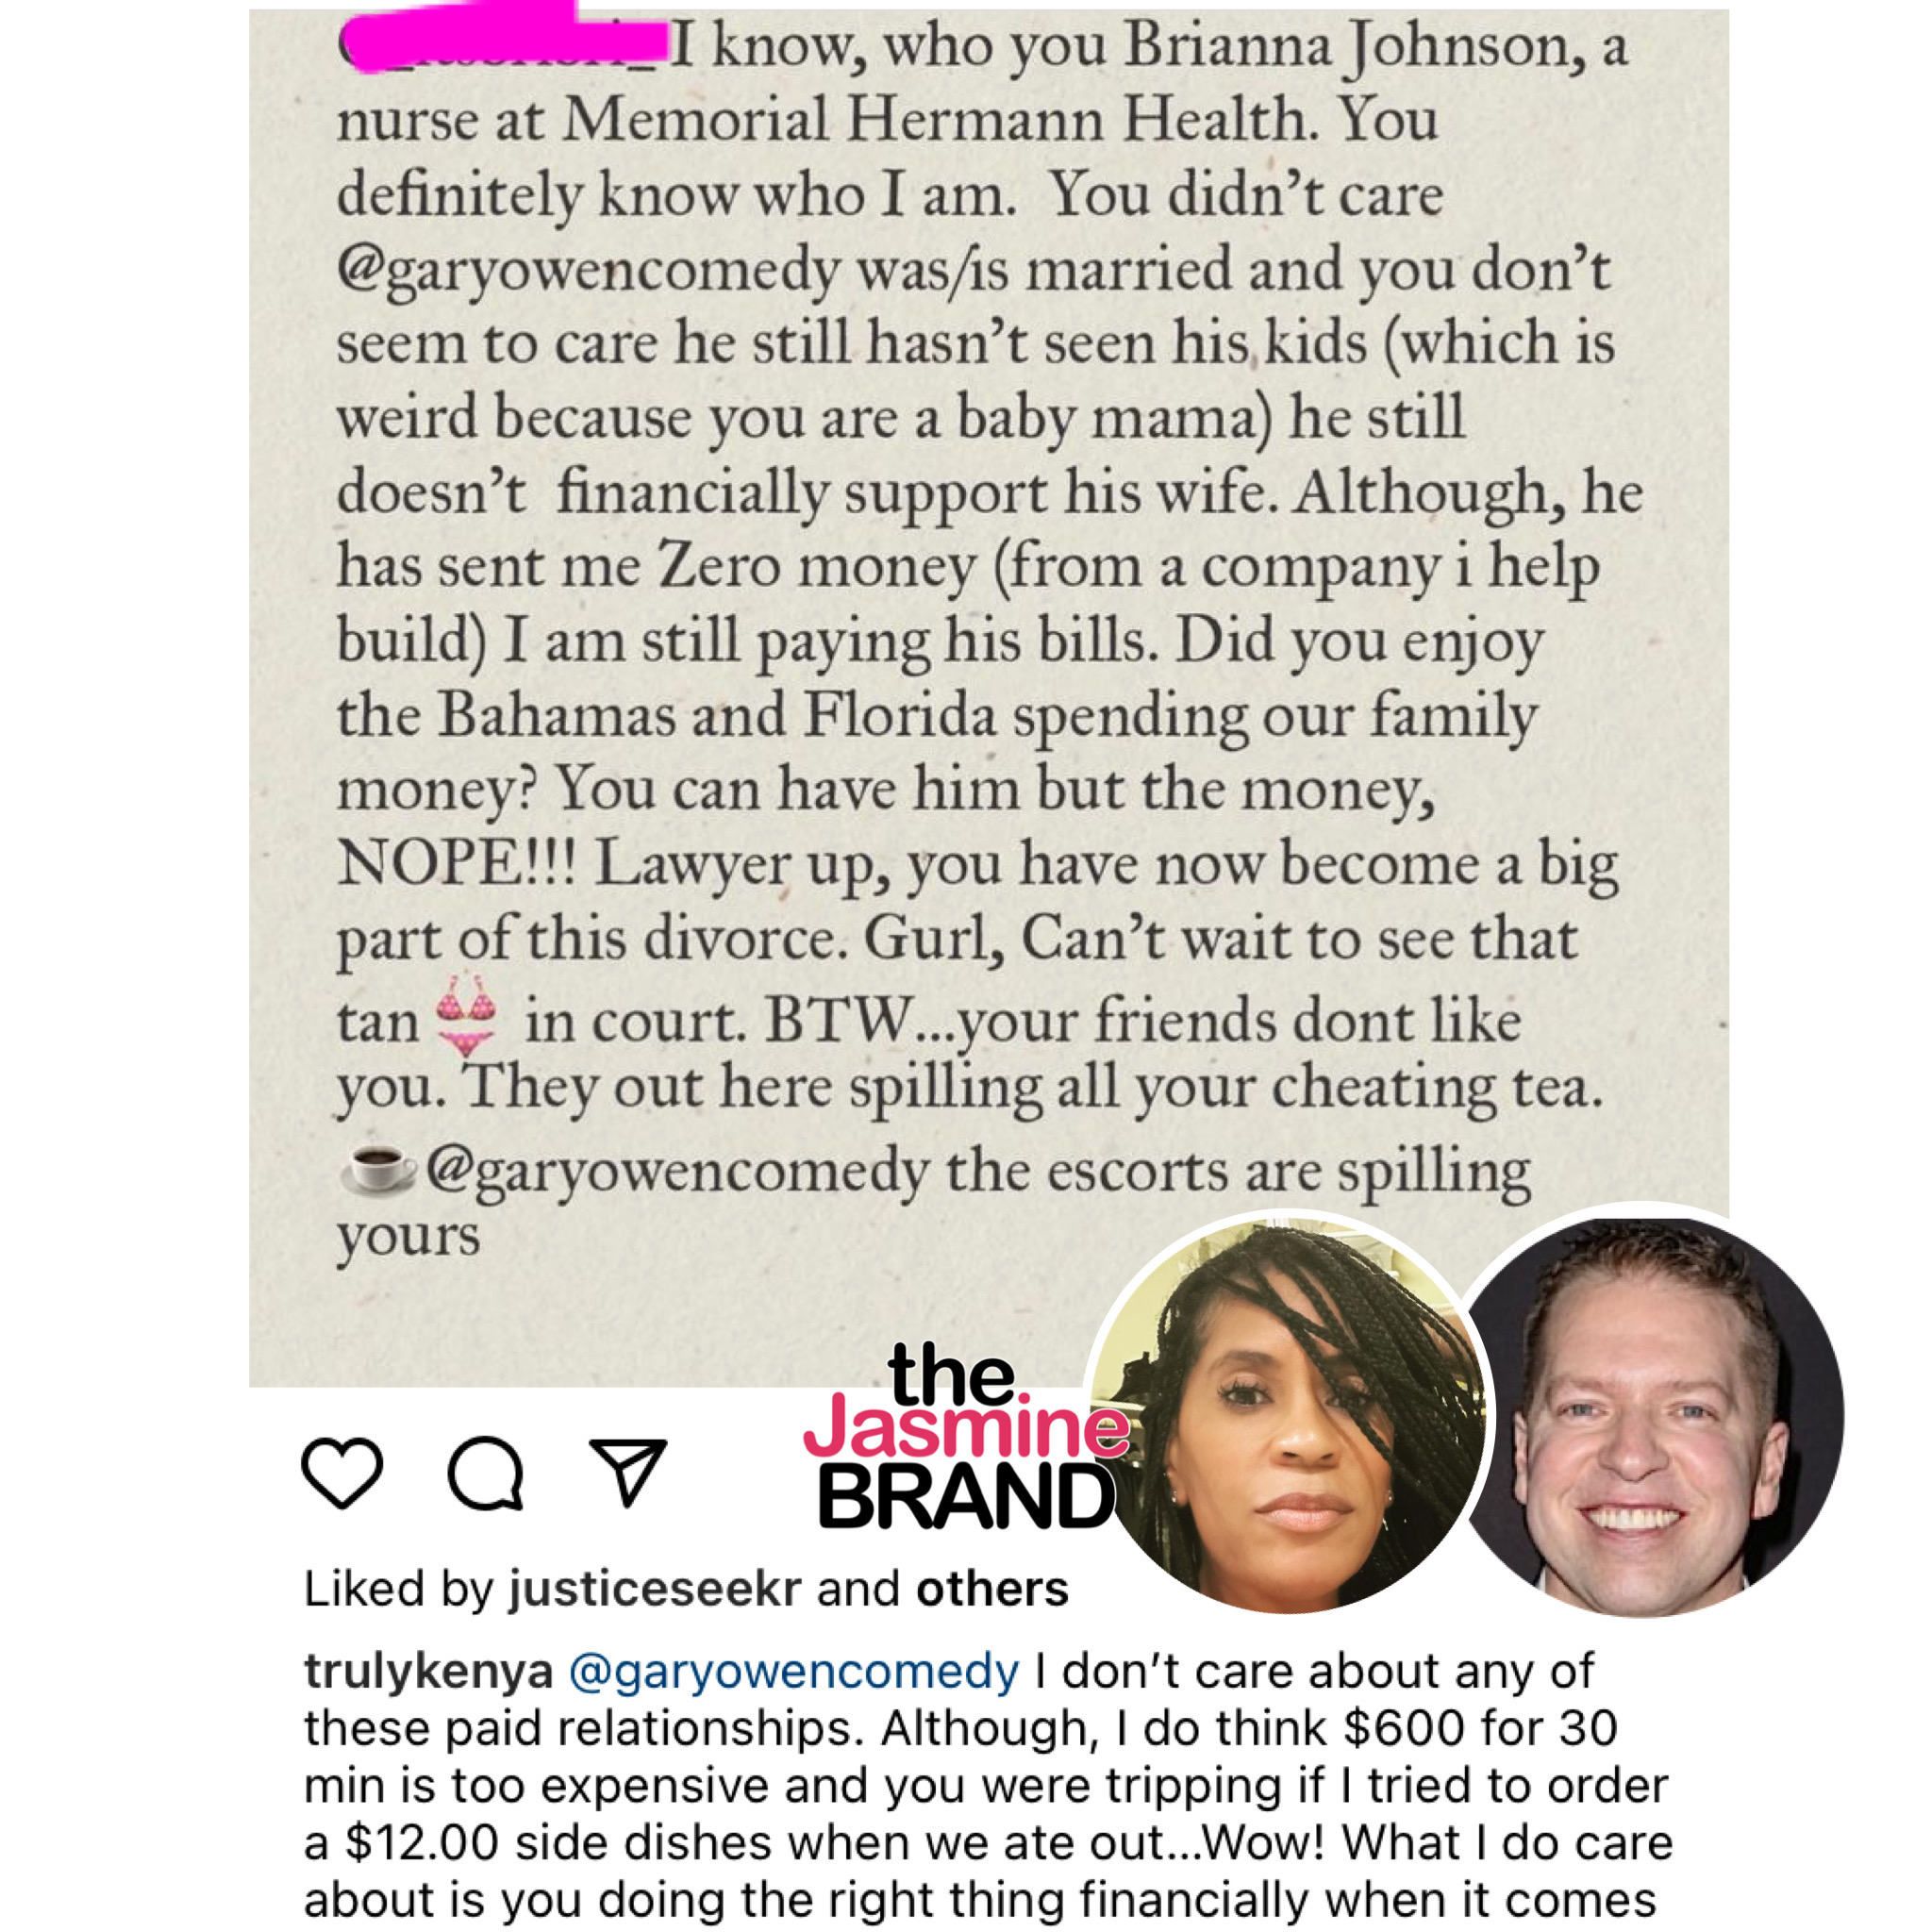 Comedian Gary Owens Estranged Wife Writes Letter To His Alleged Mistress Lawyer Up, Youre Part Of This Divorce!